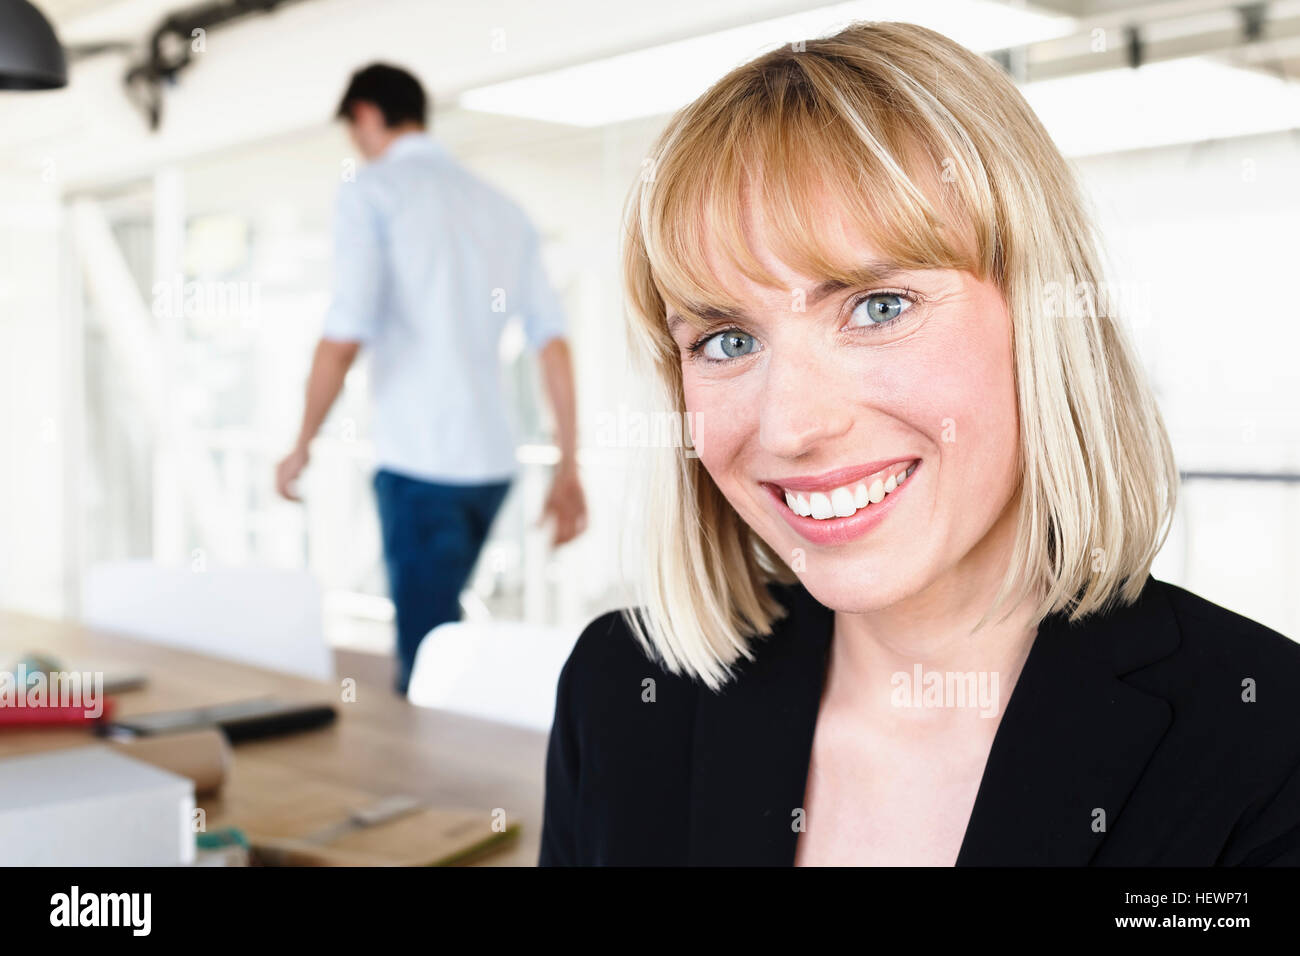 Portrait of business woman looking at camera smiling Stock Photo